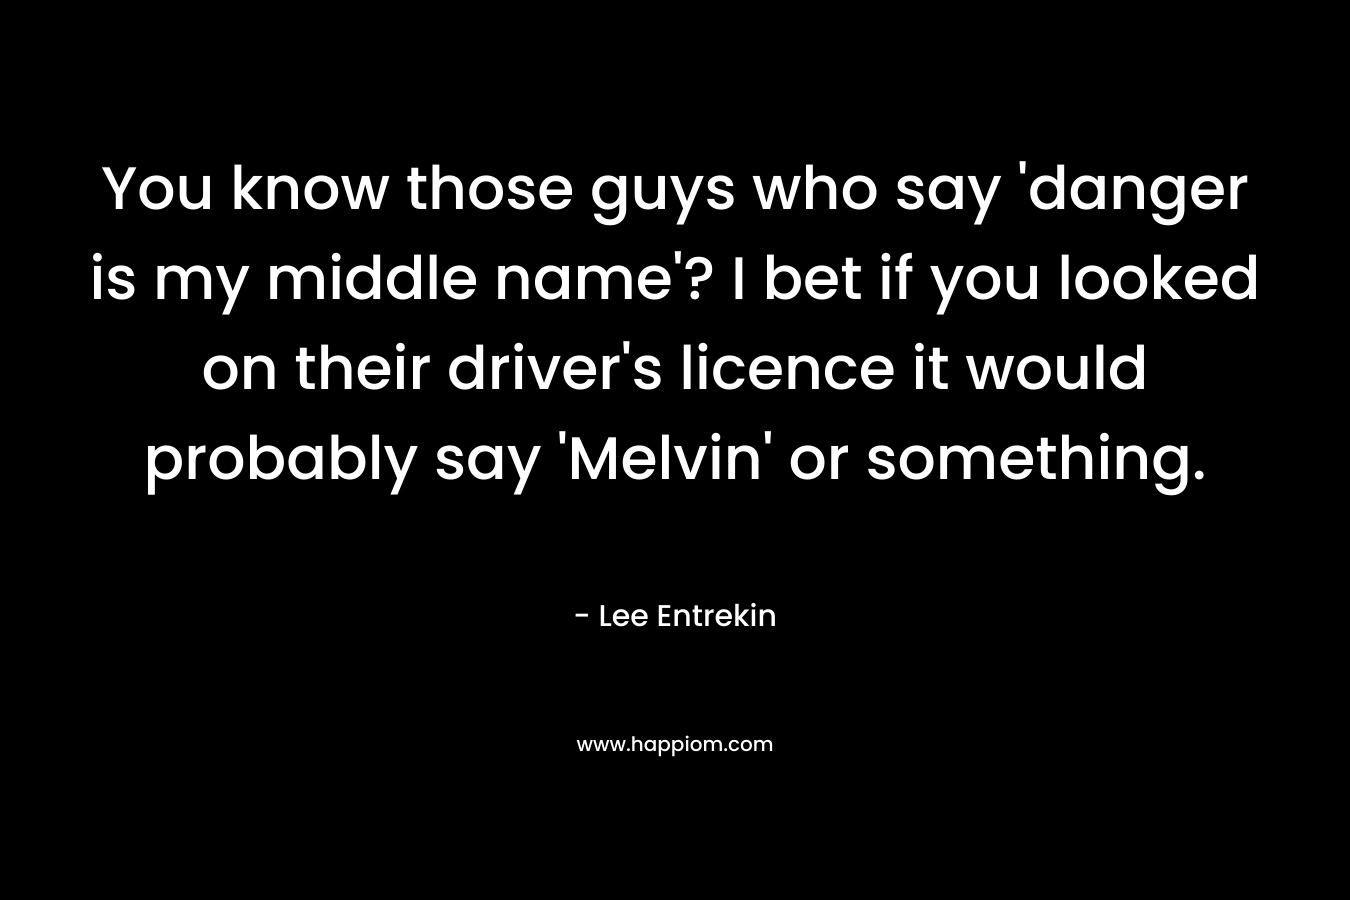 You know those guys who say ‘danger is my middle name’? I bet if you looked on their driver’s licence it would probably say ‘Melvin’ or something. – Lee Entrekin